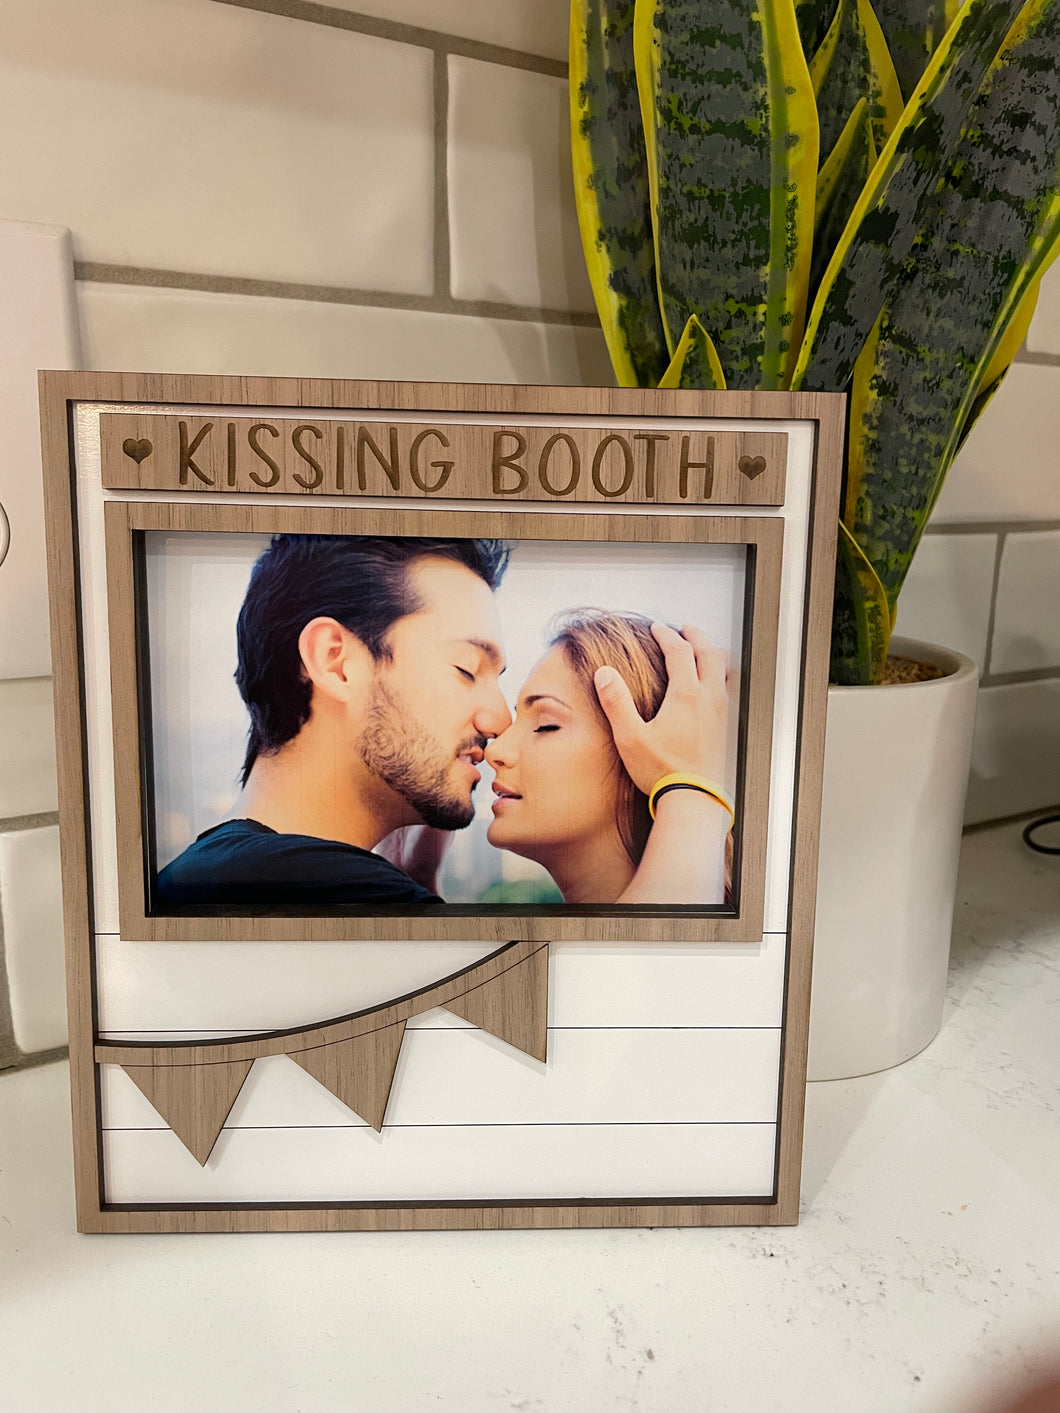 Kissing Booth picture frame